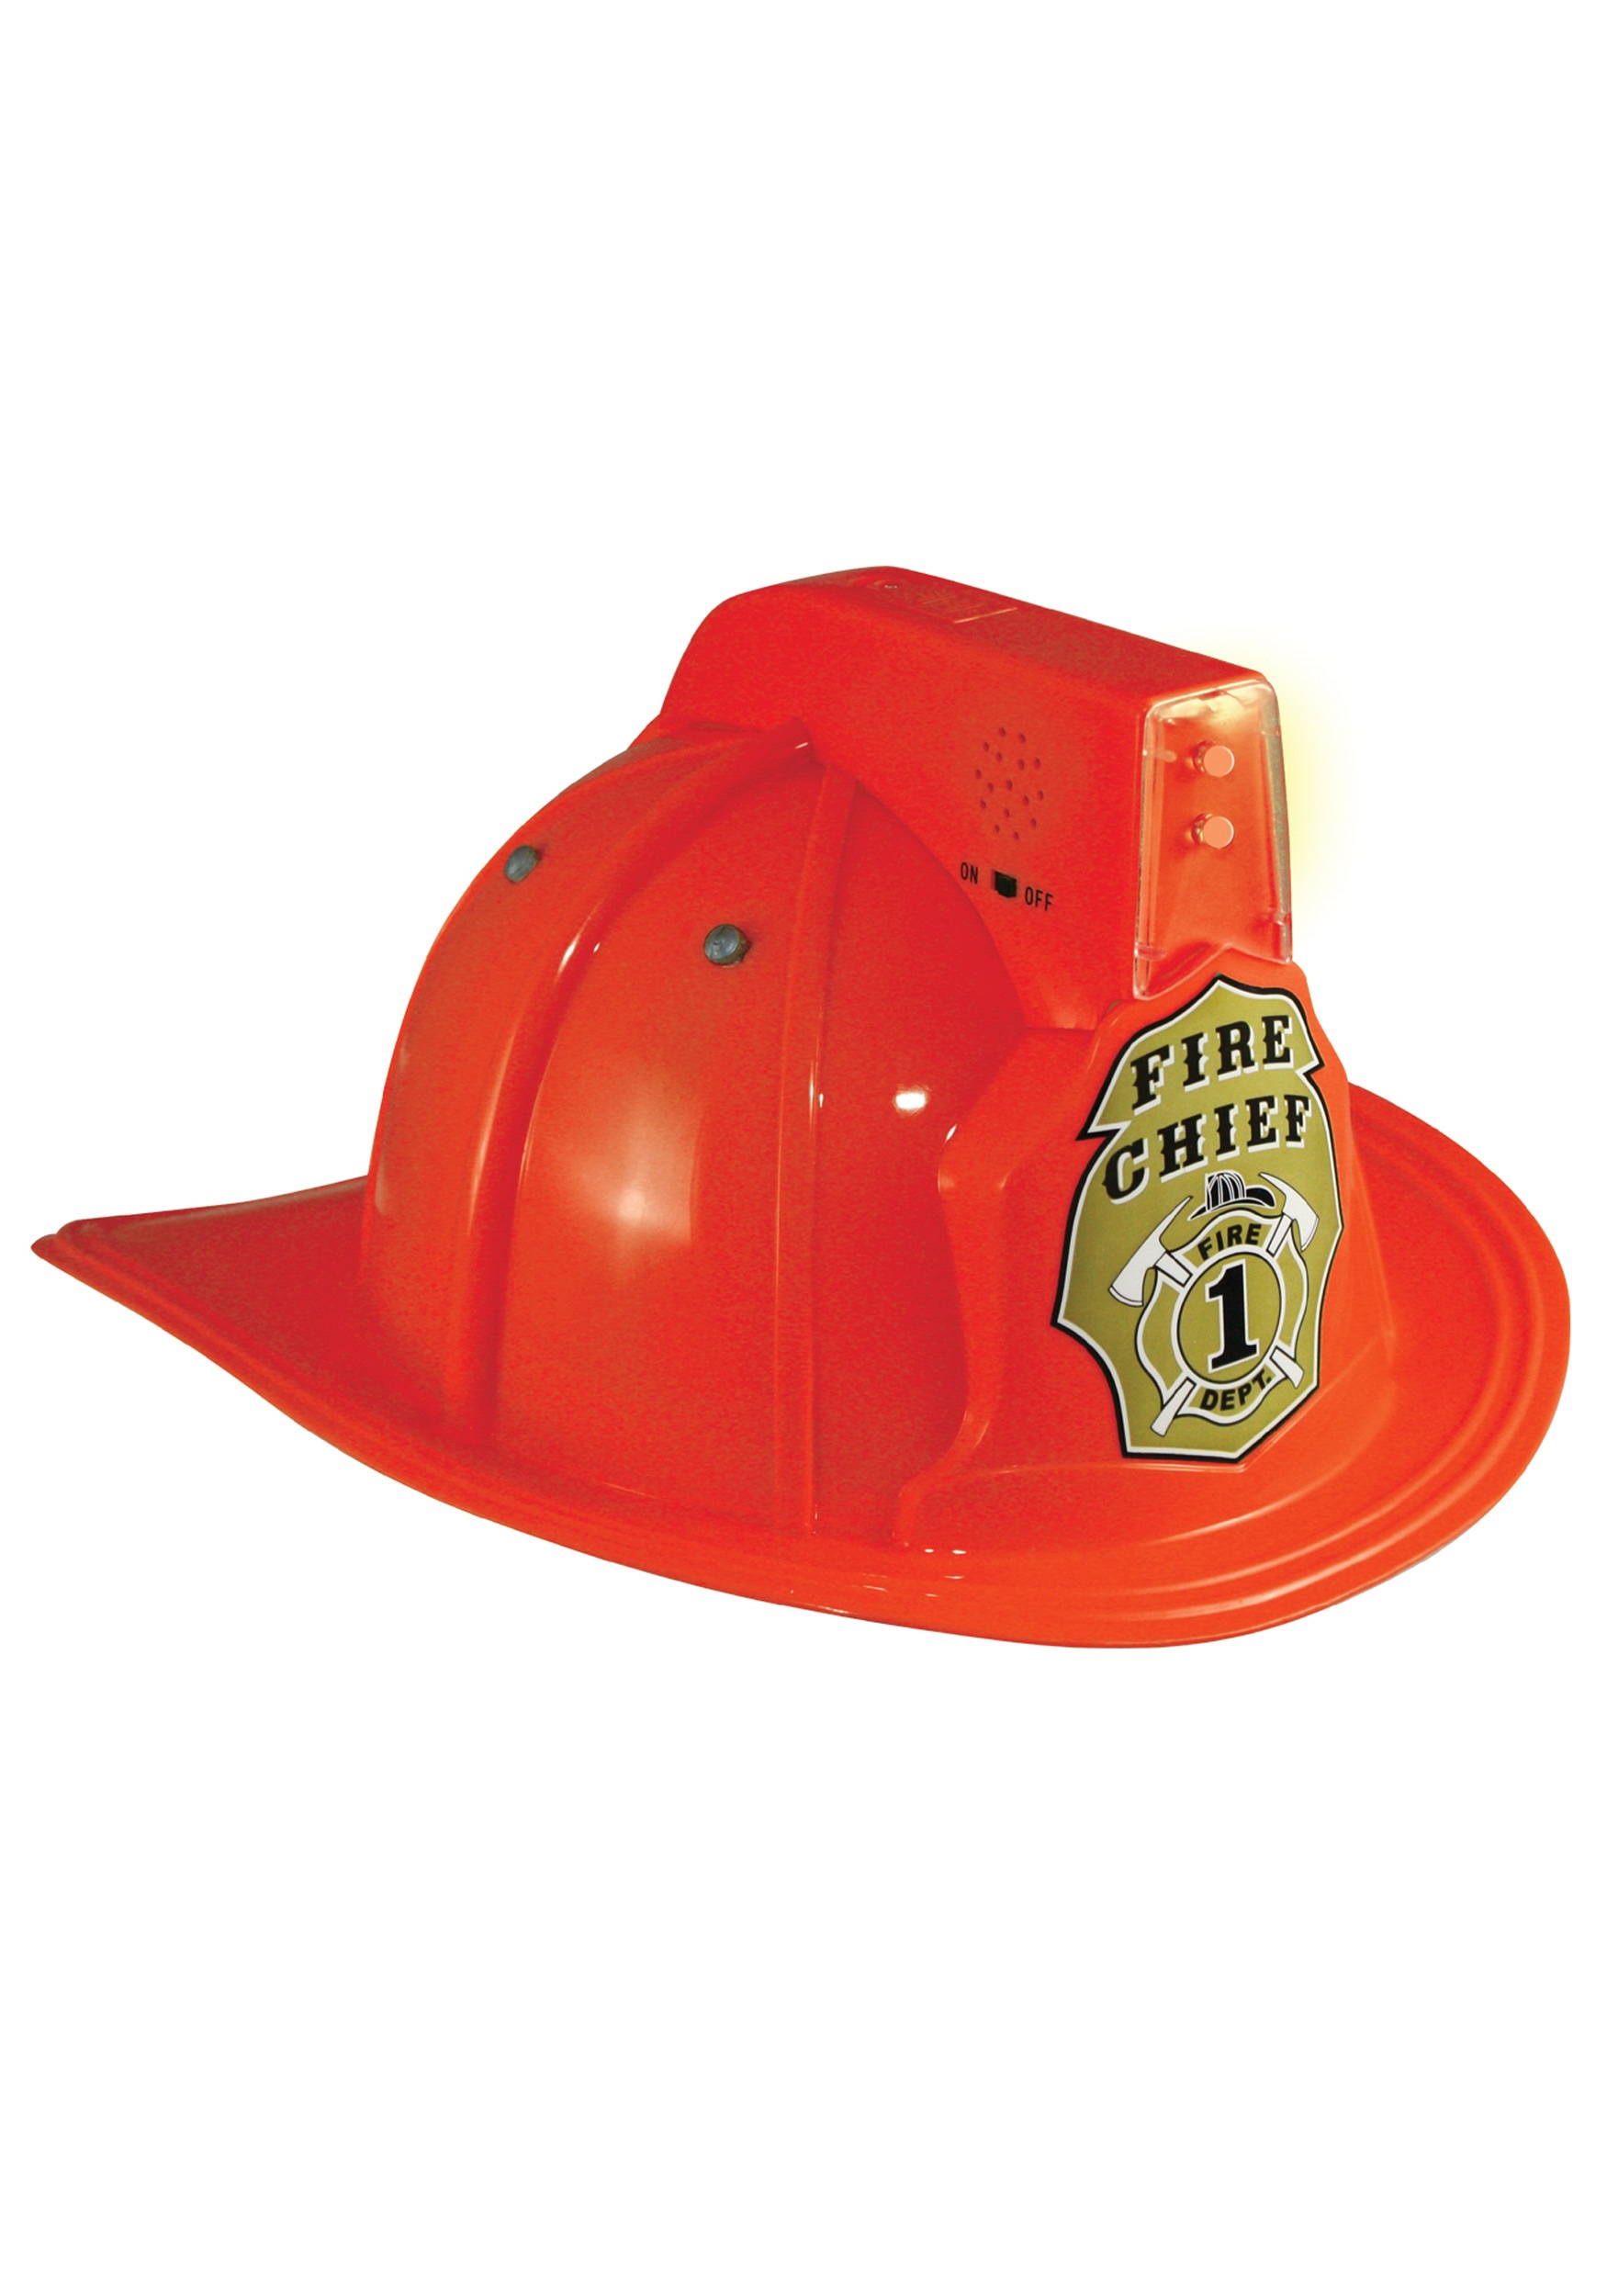 Jr. Fire Chief Costume Helmet Light Up with Sound